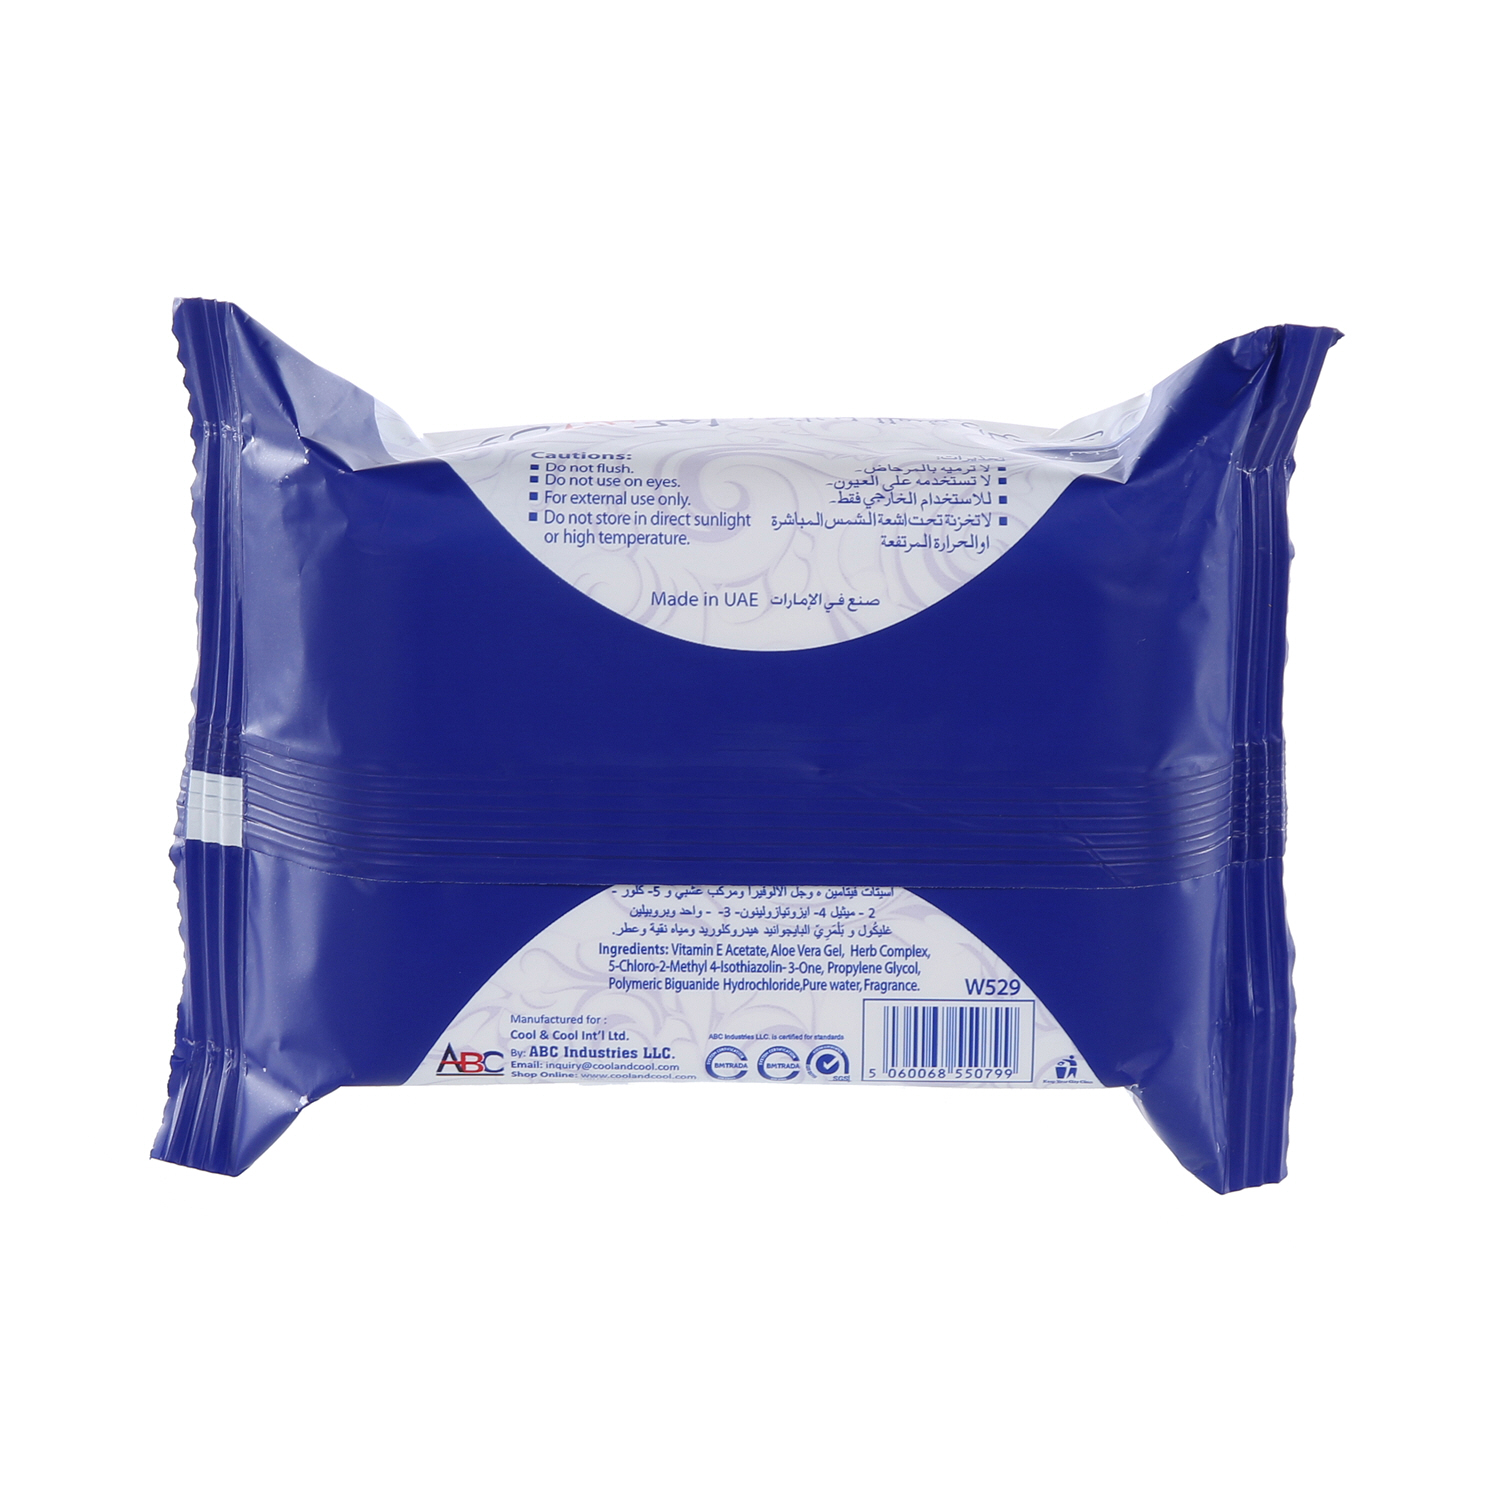 Cool & Cool Travel 30 Wet Wipes